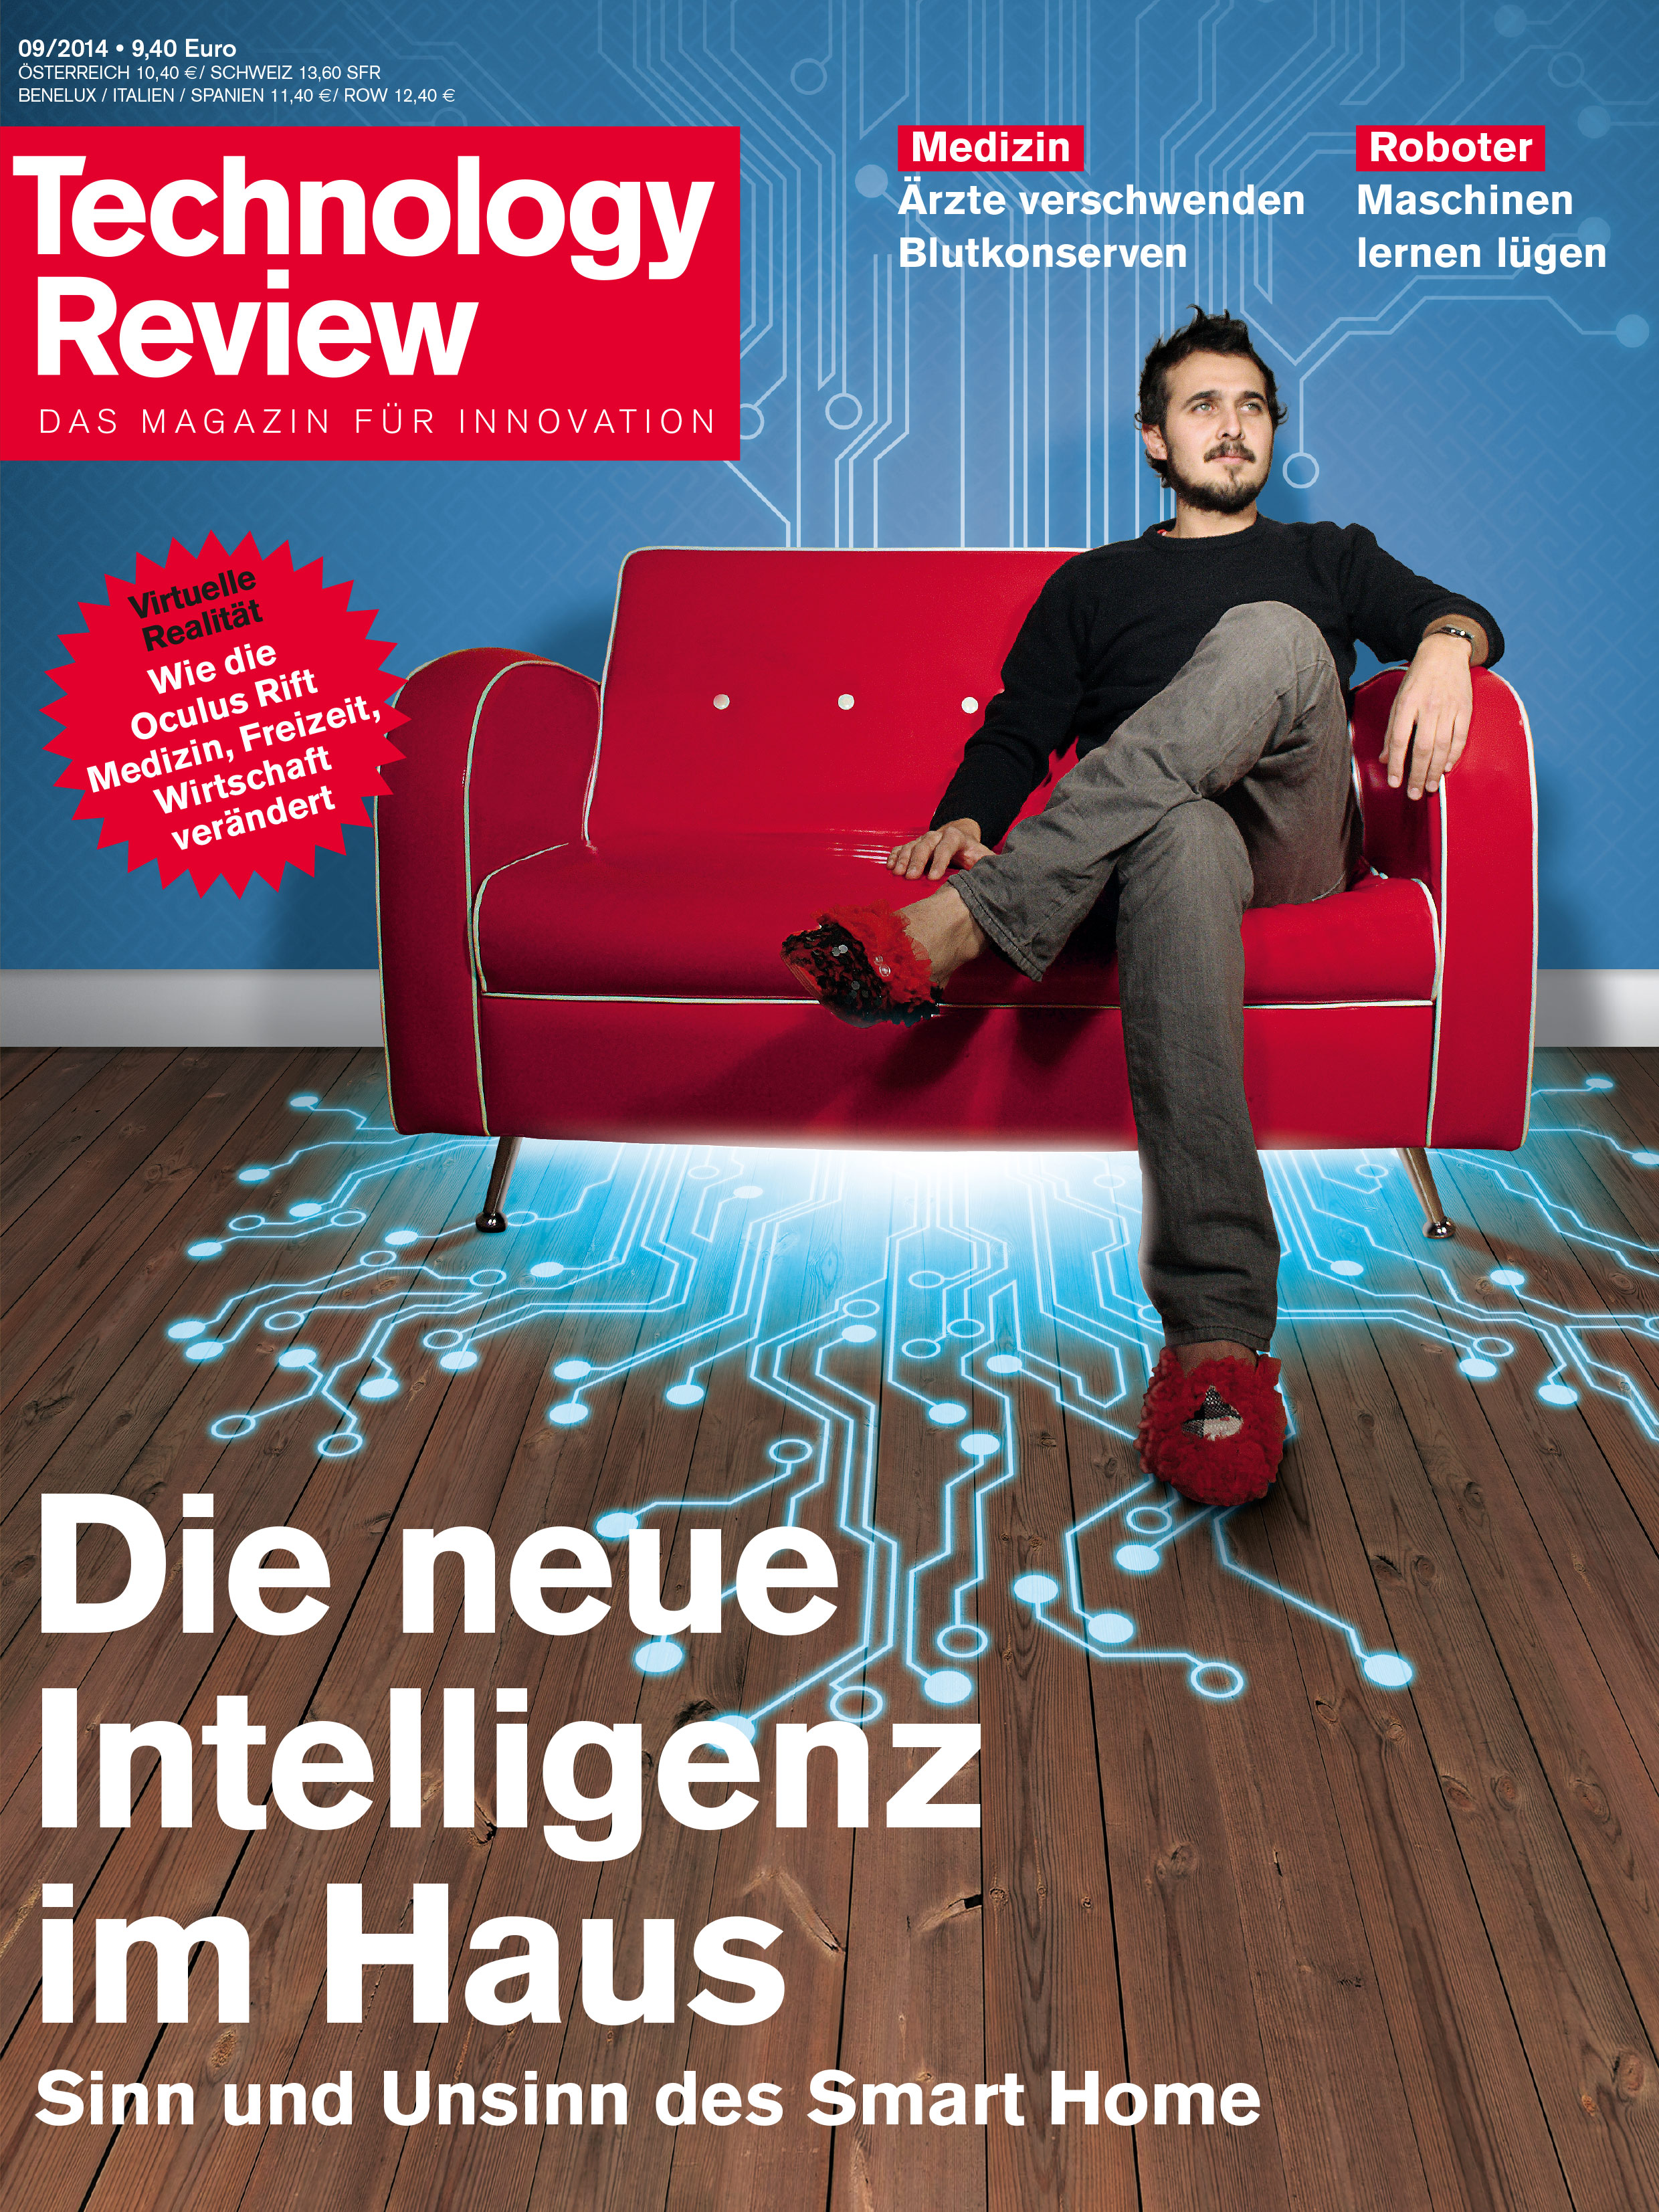 Technology Review 09/2014